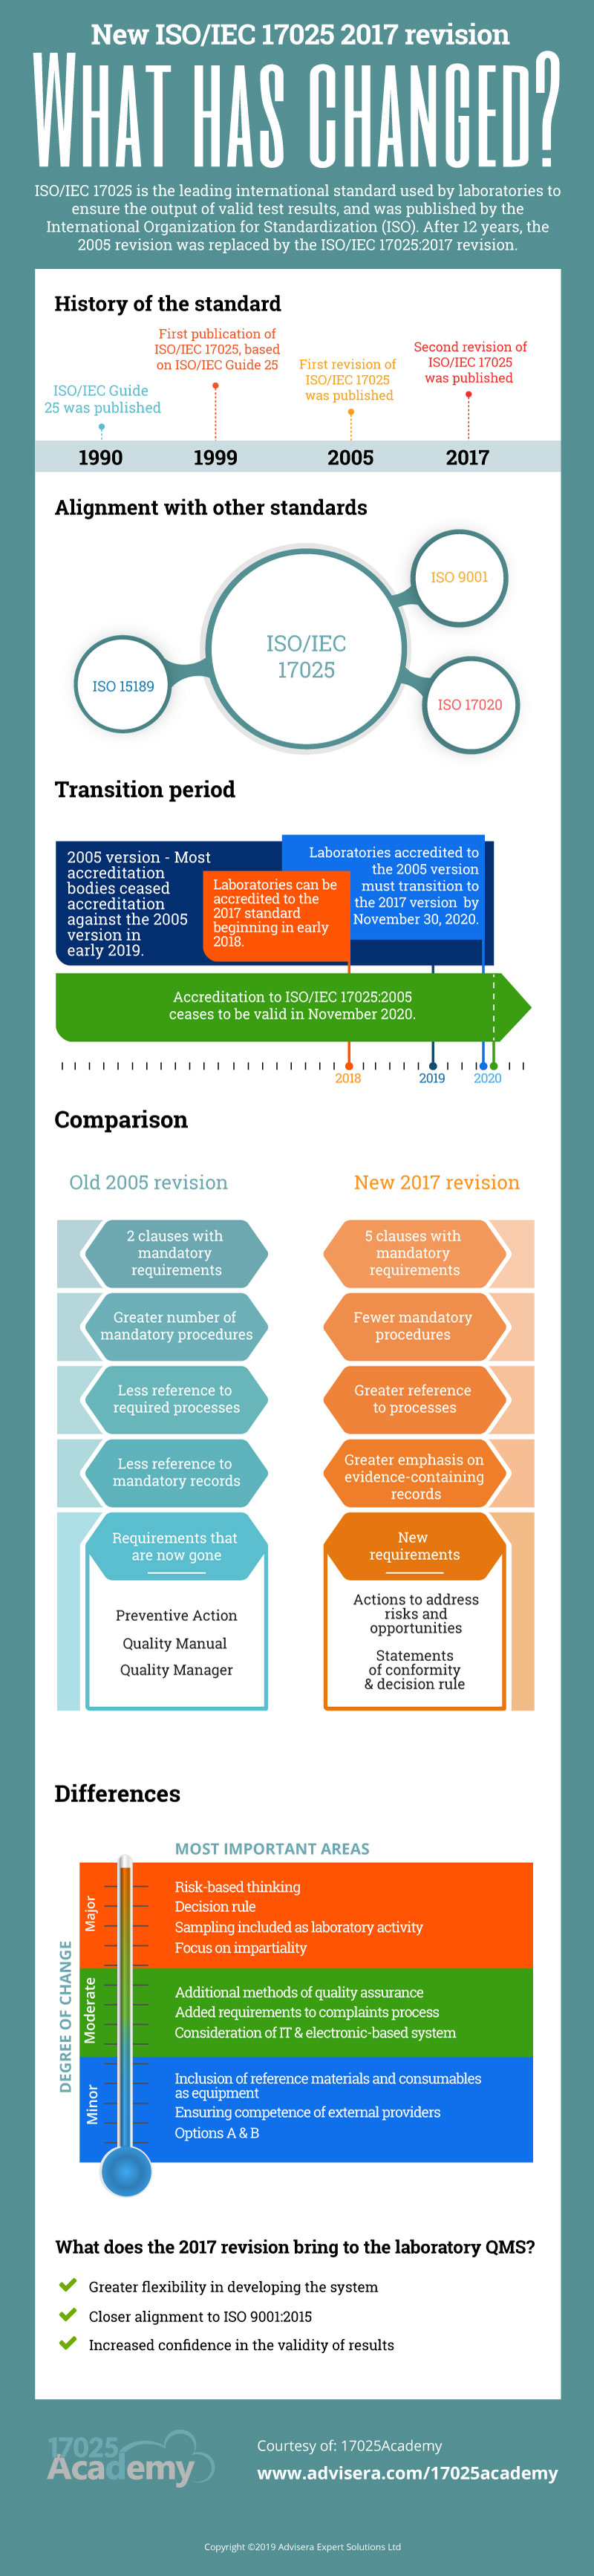 Infographic - ISO 17025:2017 vs. ISO 17025:2005: Key changes